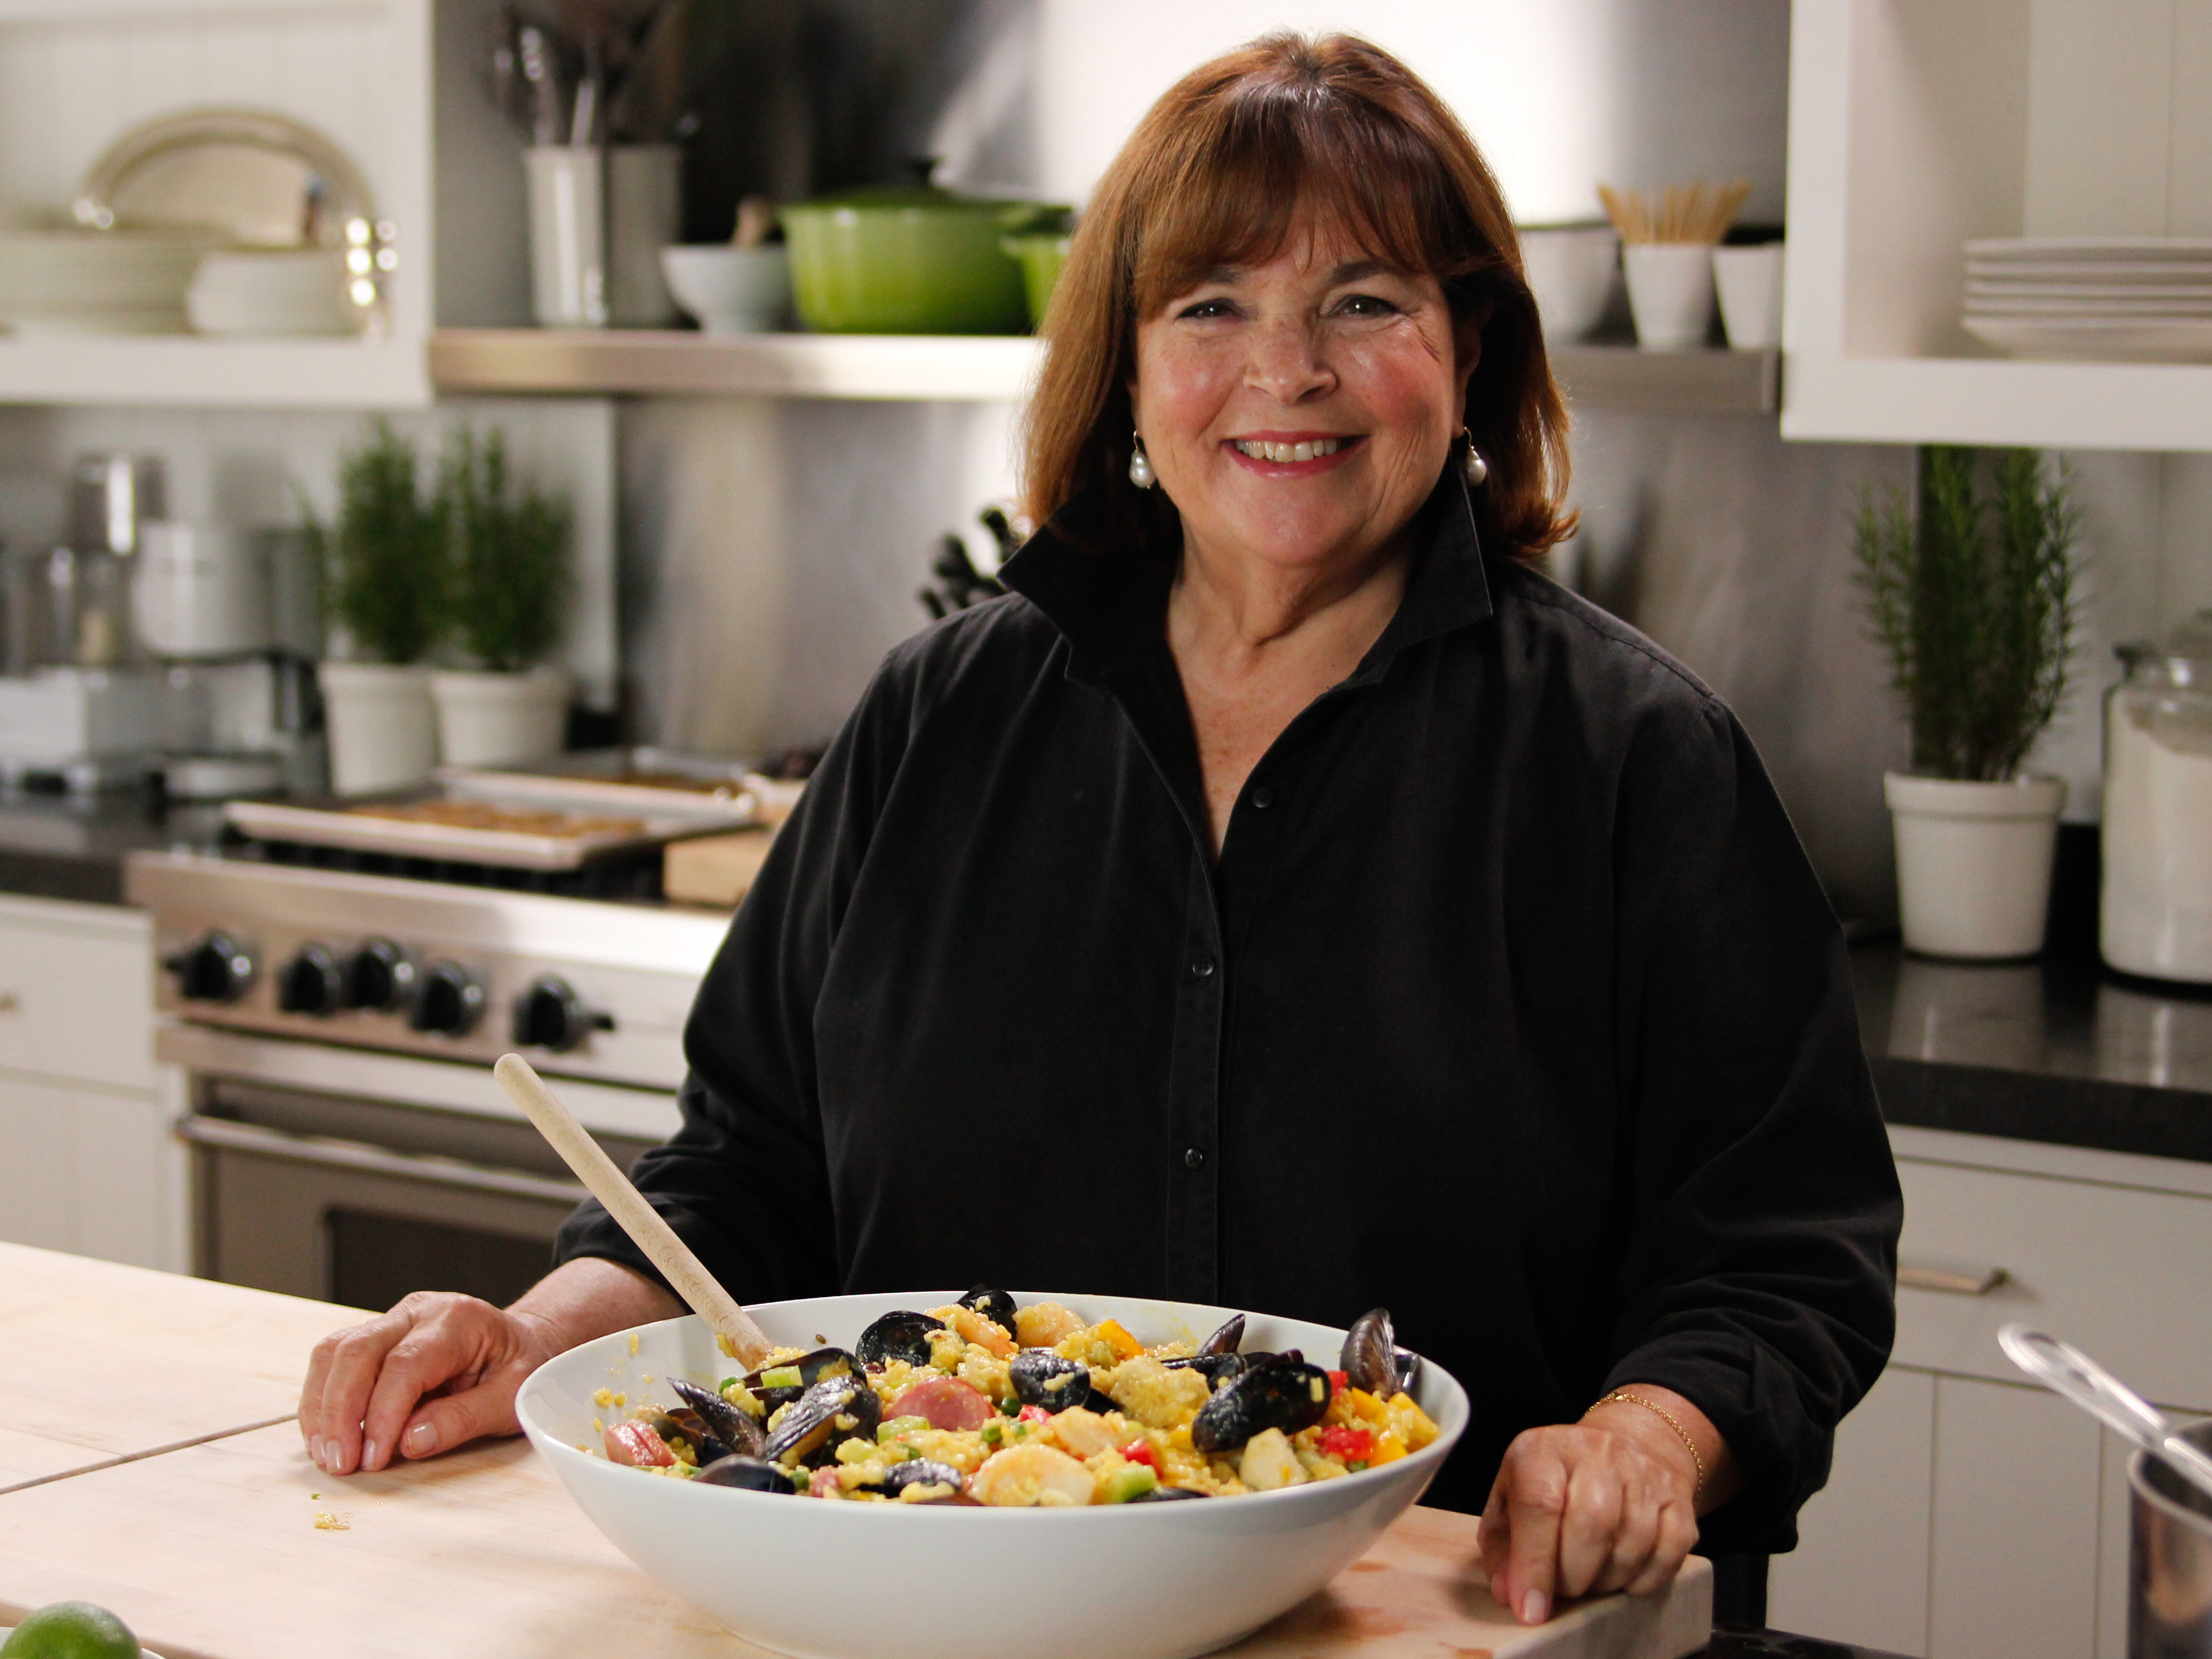 Barefoot Contessa Parties! Ideas and Recipes for Easy Parties by Ina Garten